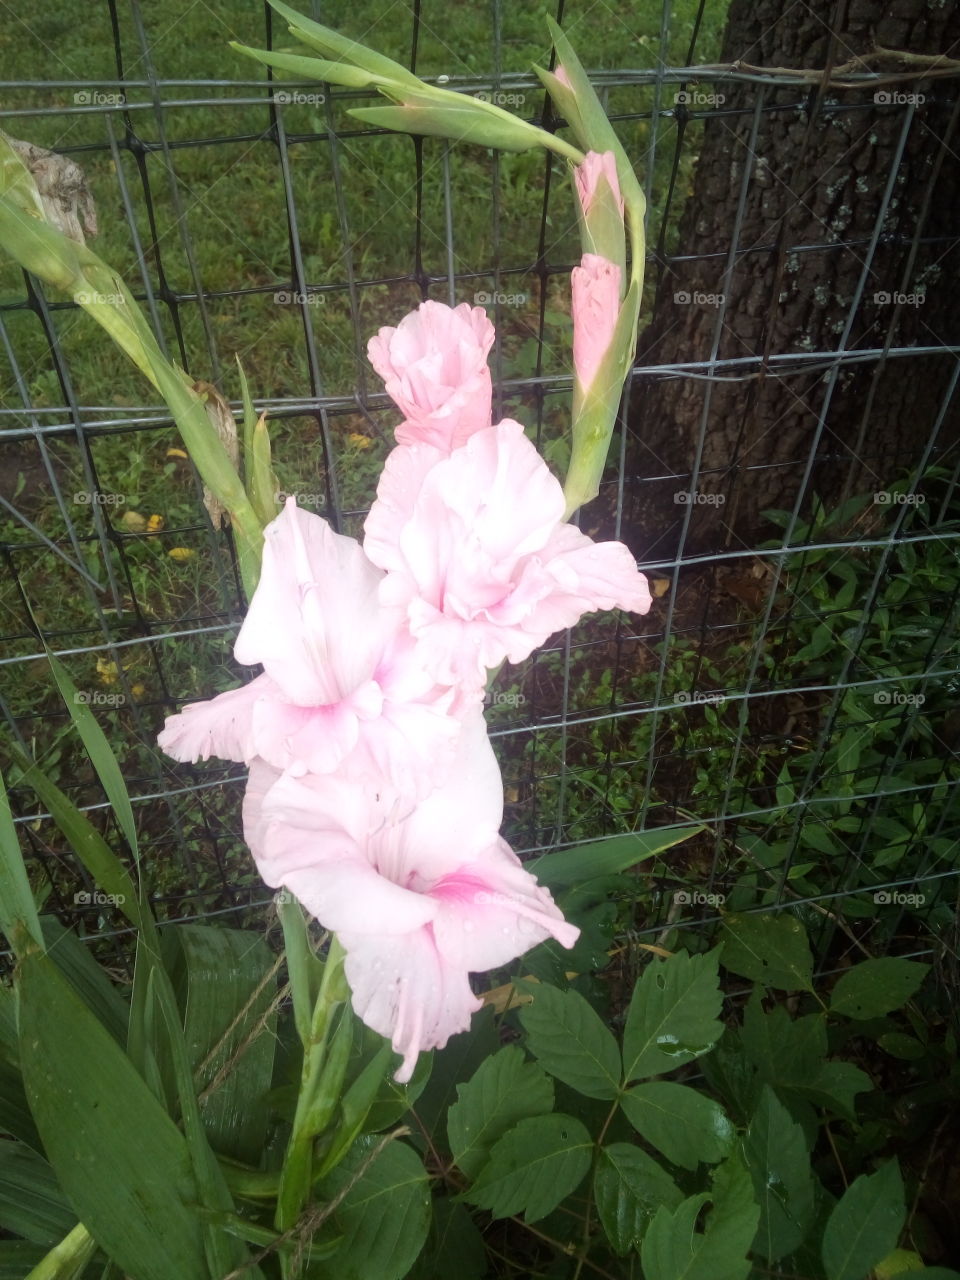 one of my pretty pink gladiolus had to tie this baby up when I found it lying on the ground.